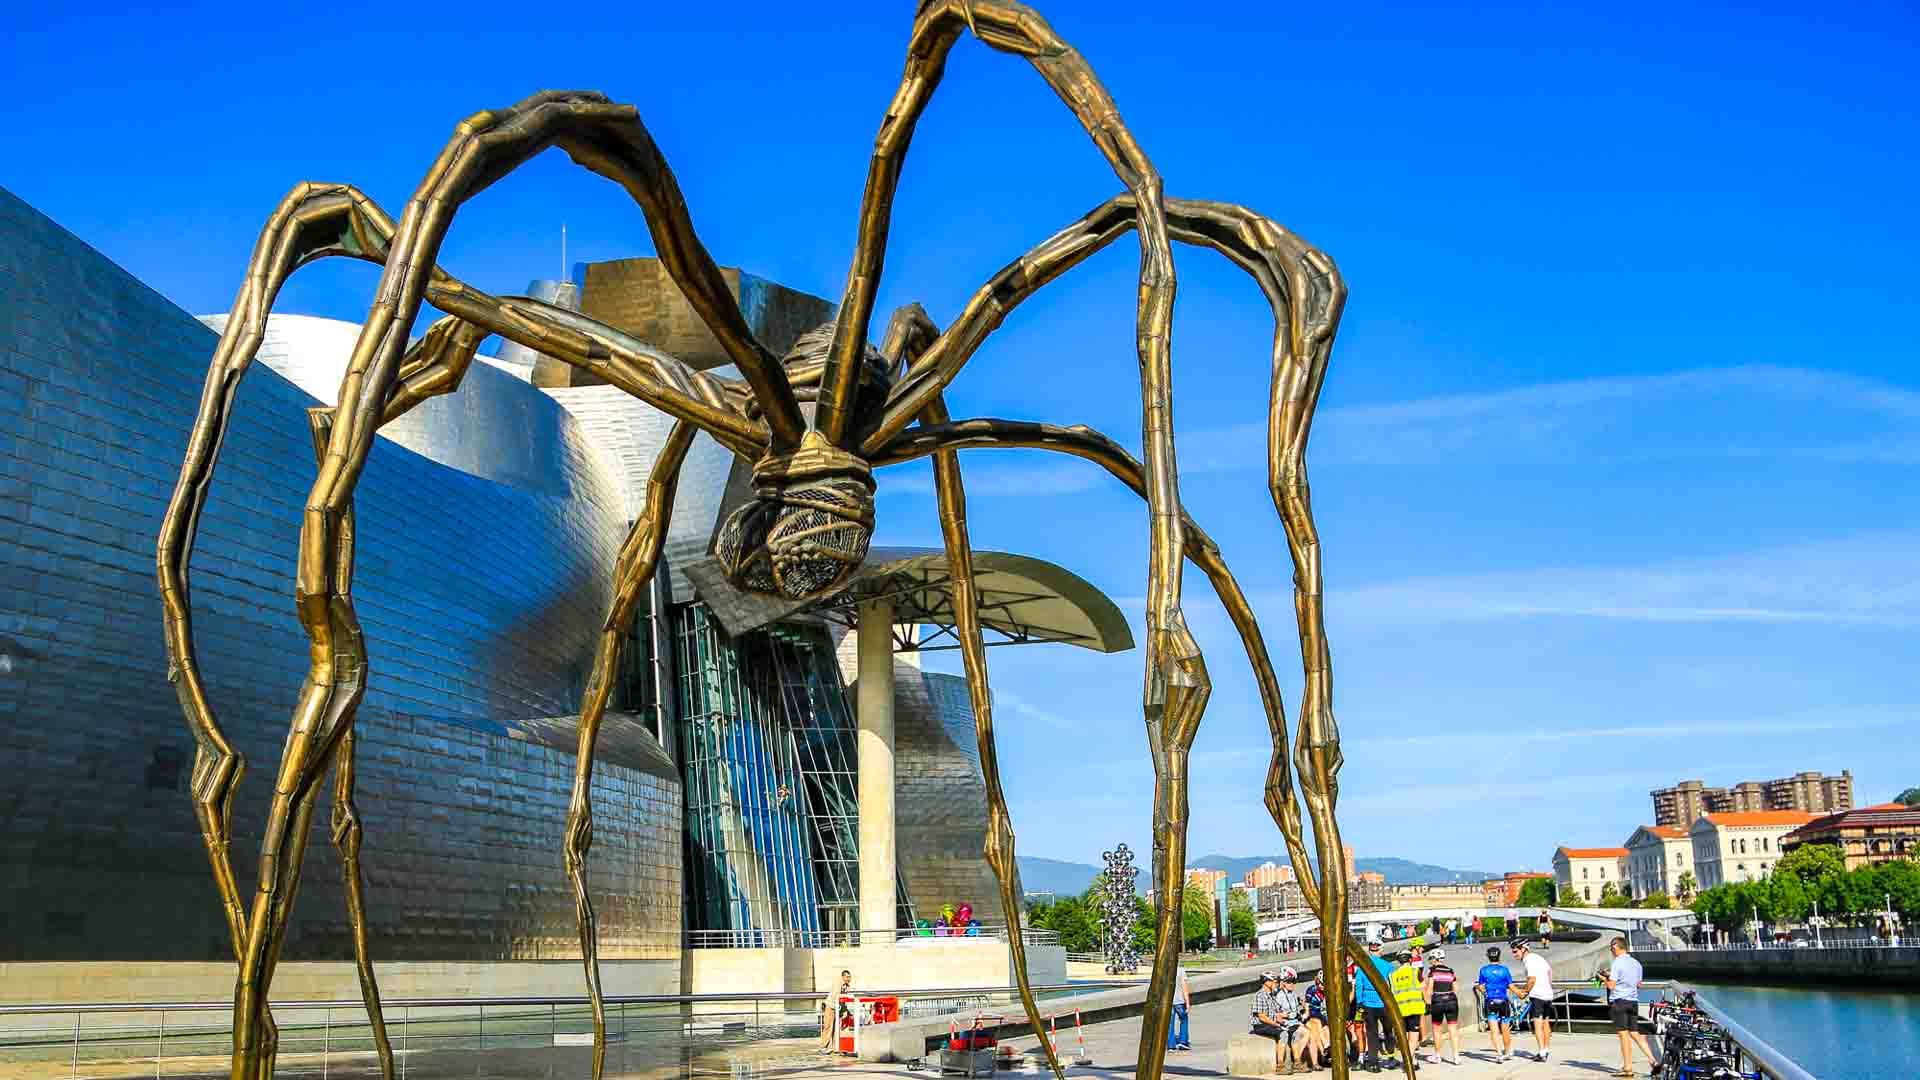 Giant spider at Giggenheim in Bilbao with blue sky behind